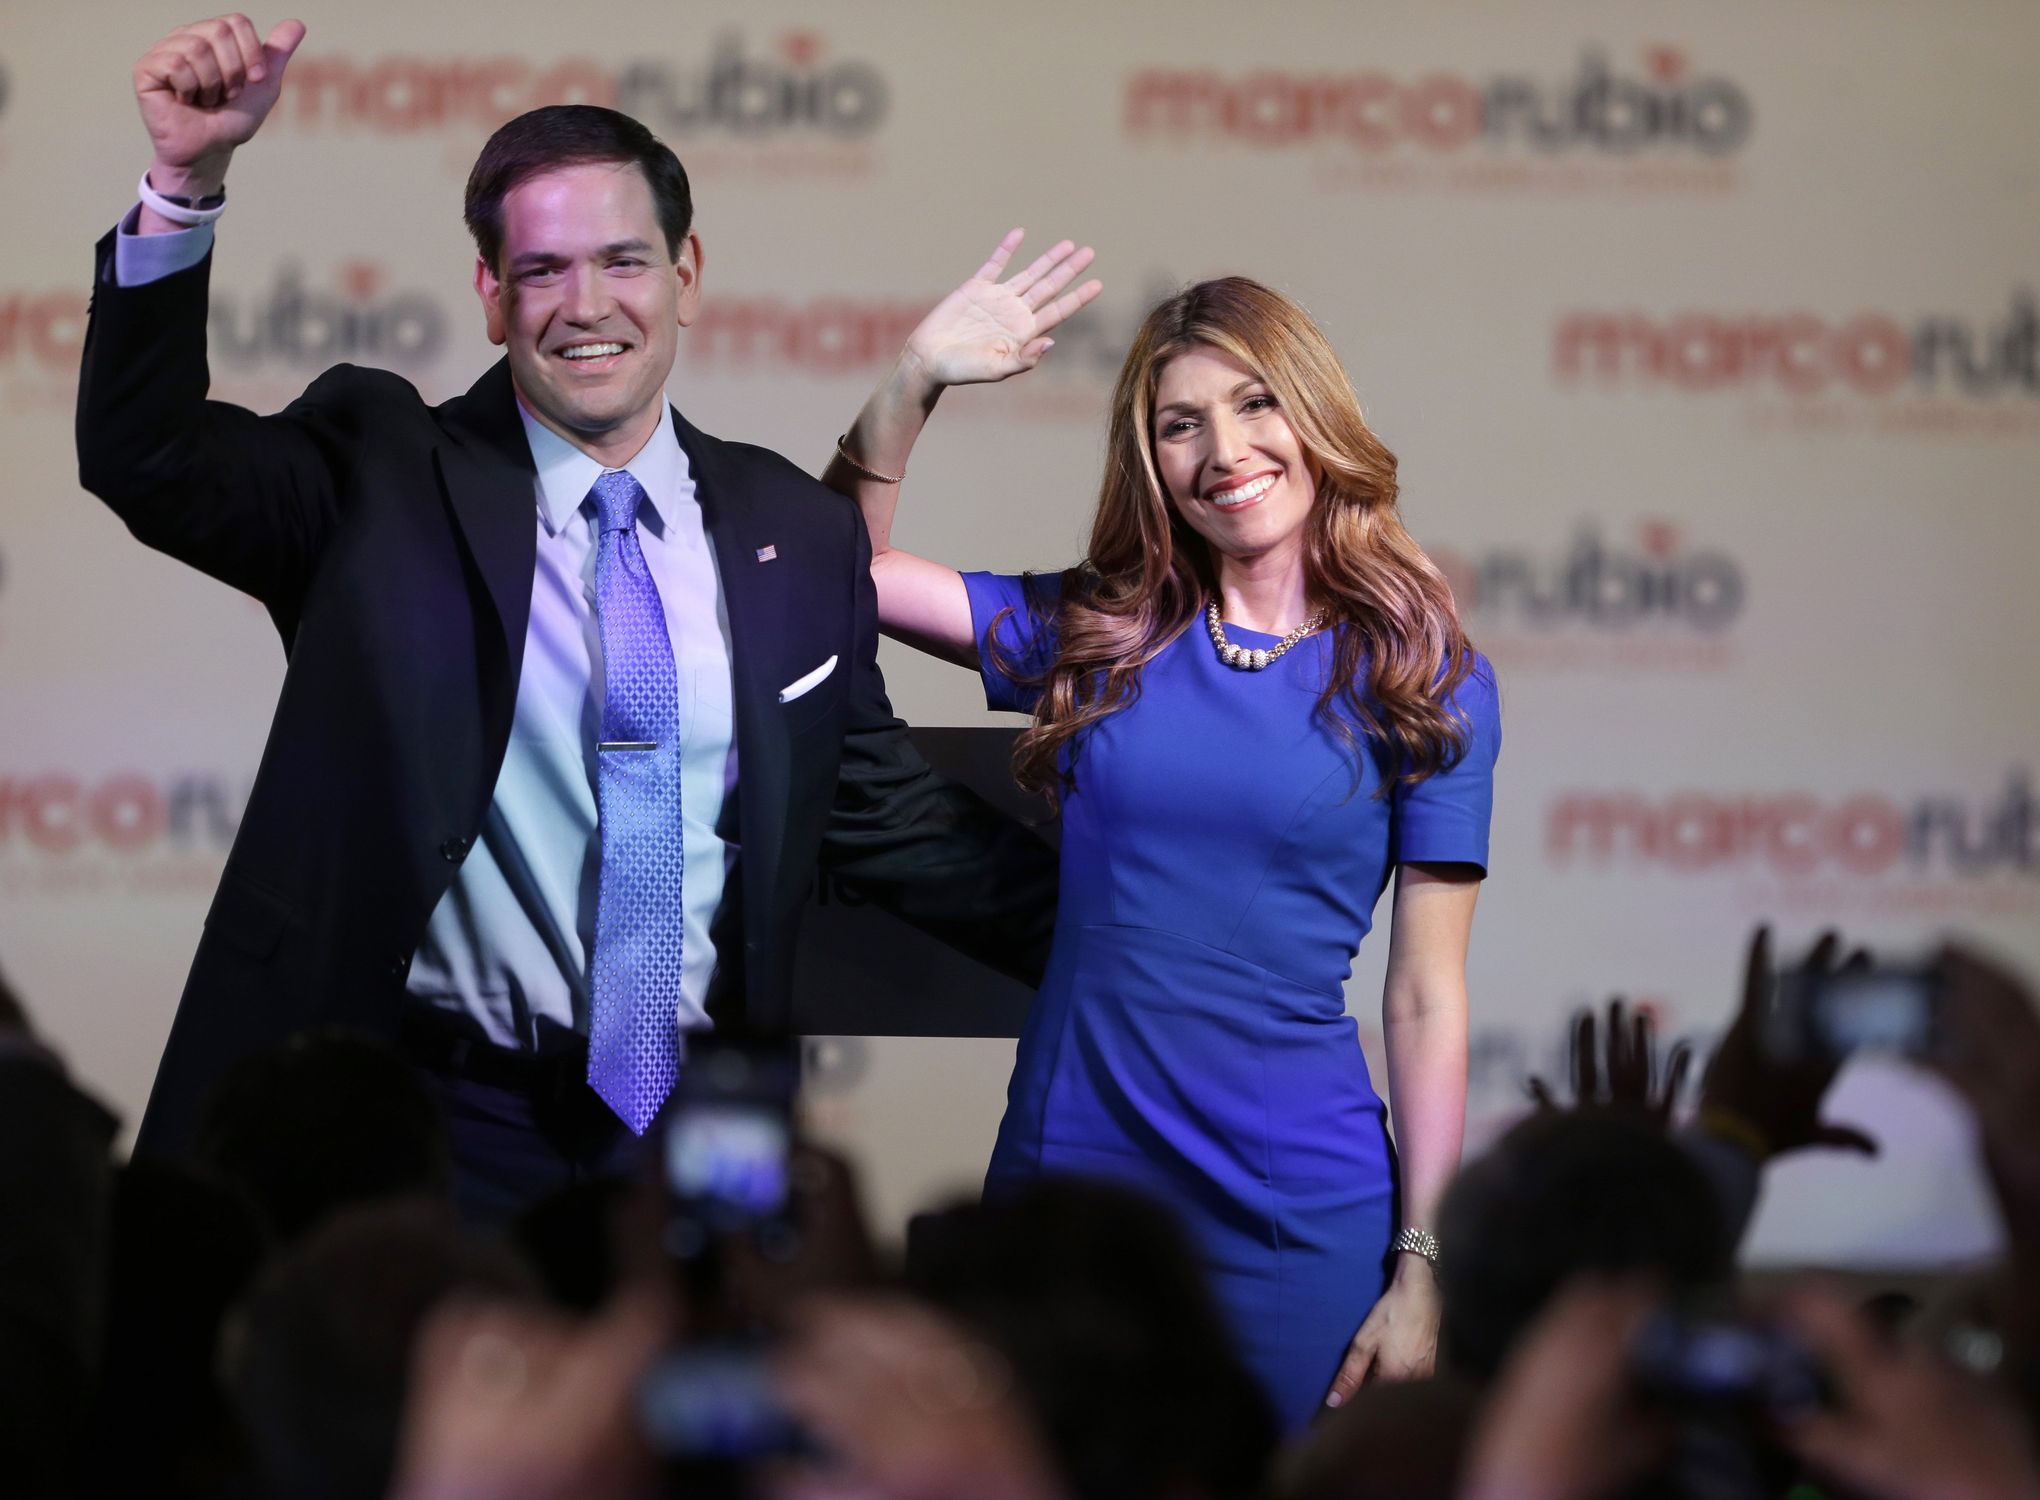 Marco Rubio Fast Facts